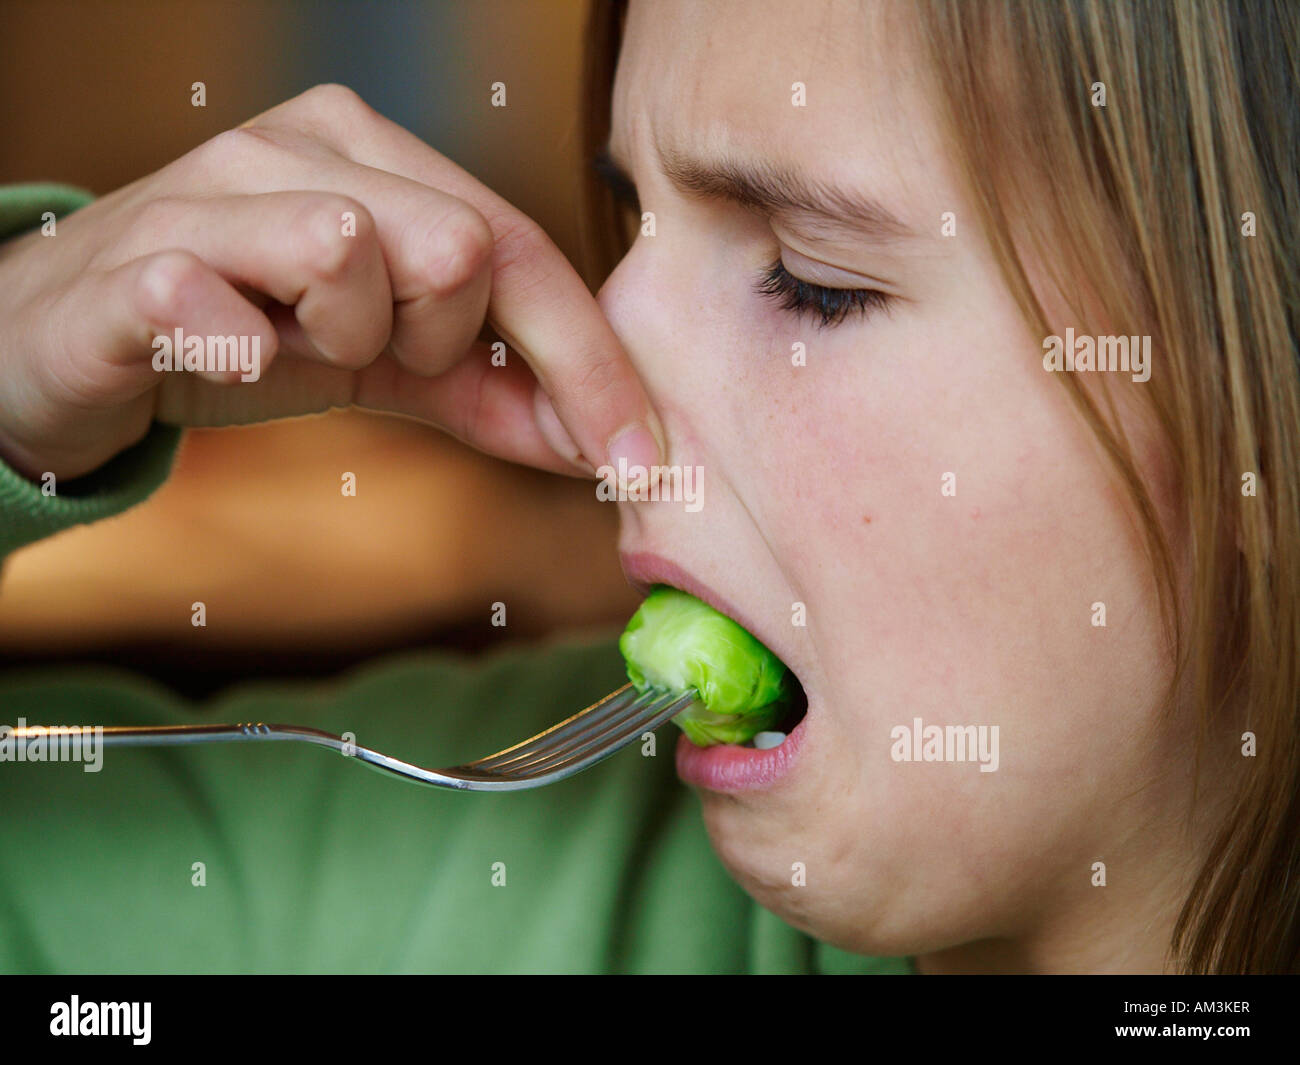 Girl 11 years old eating Brussels sprouts while pinching nose smelly Stock Photo